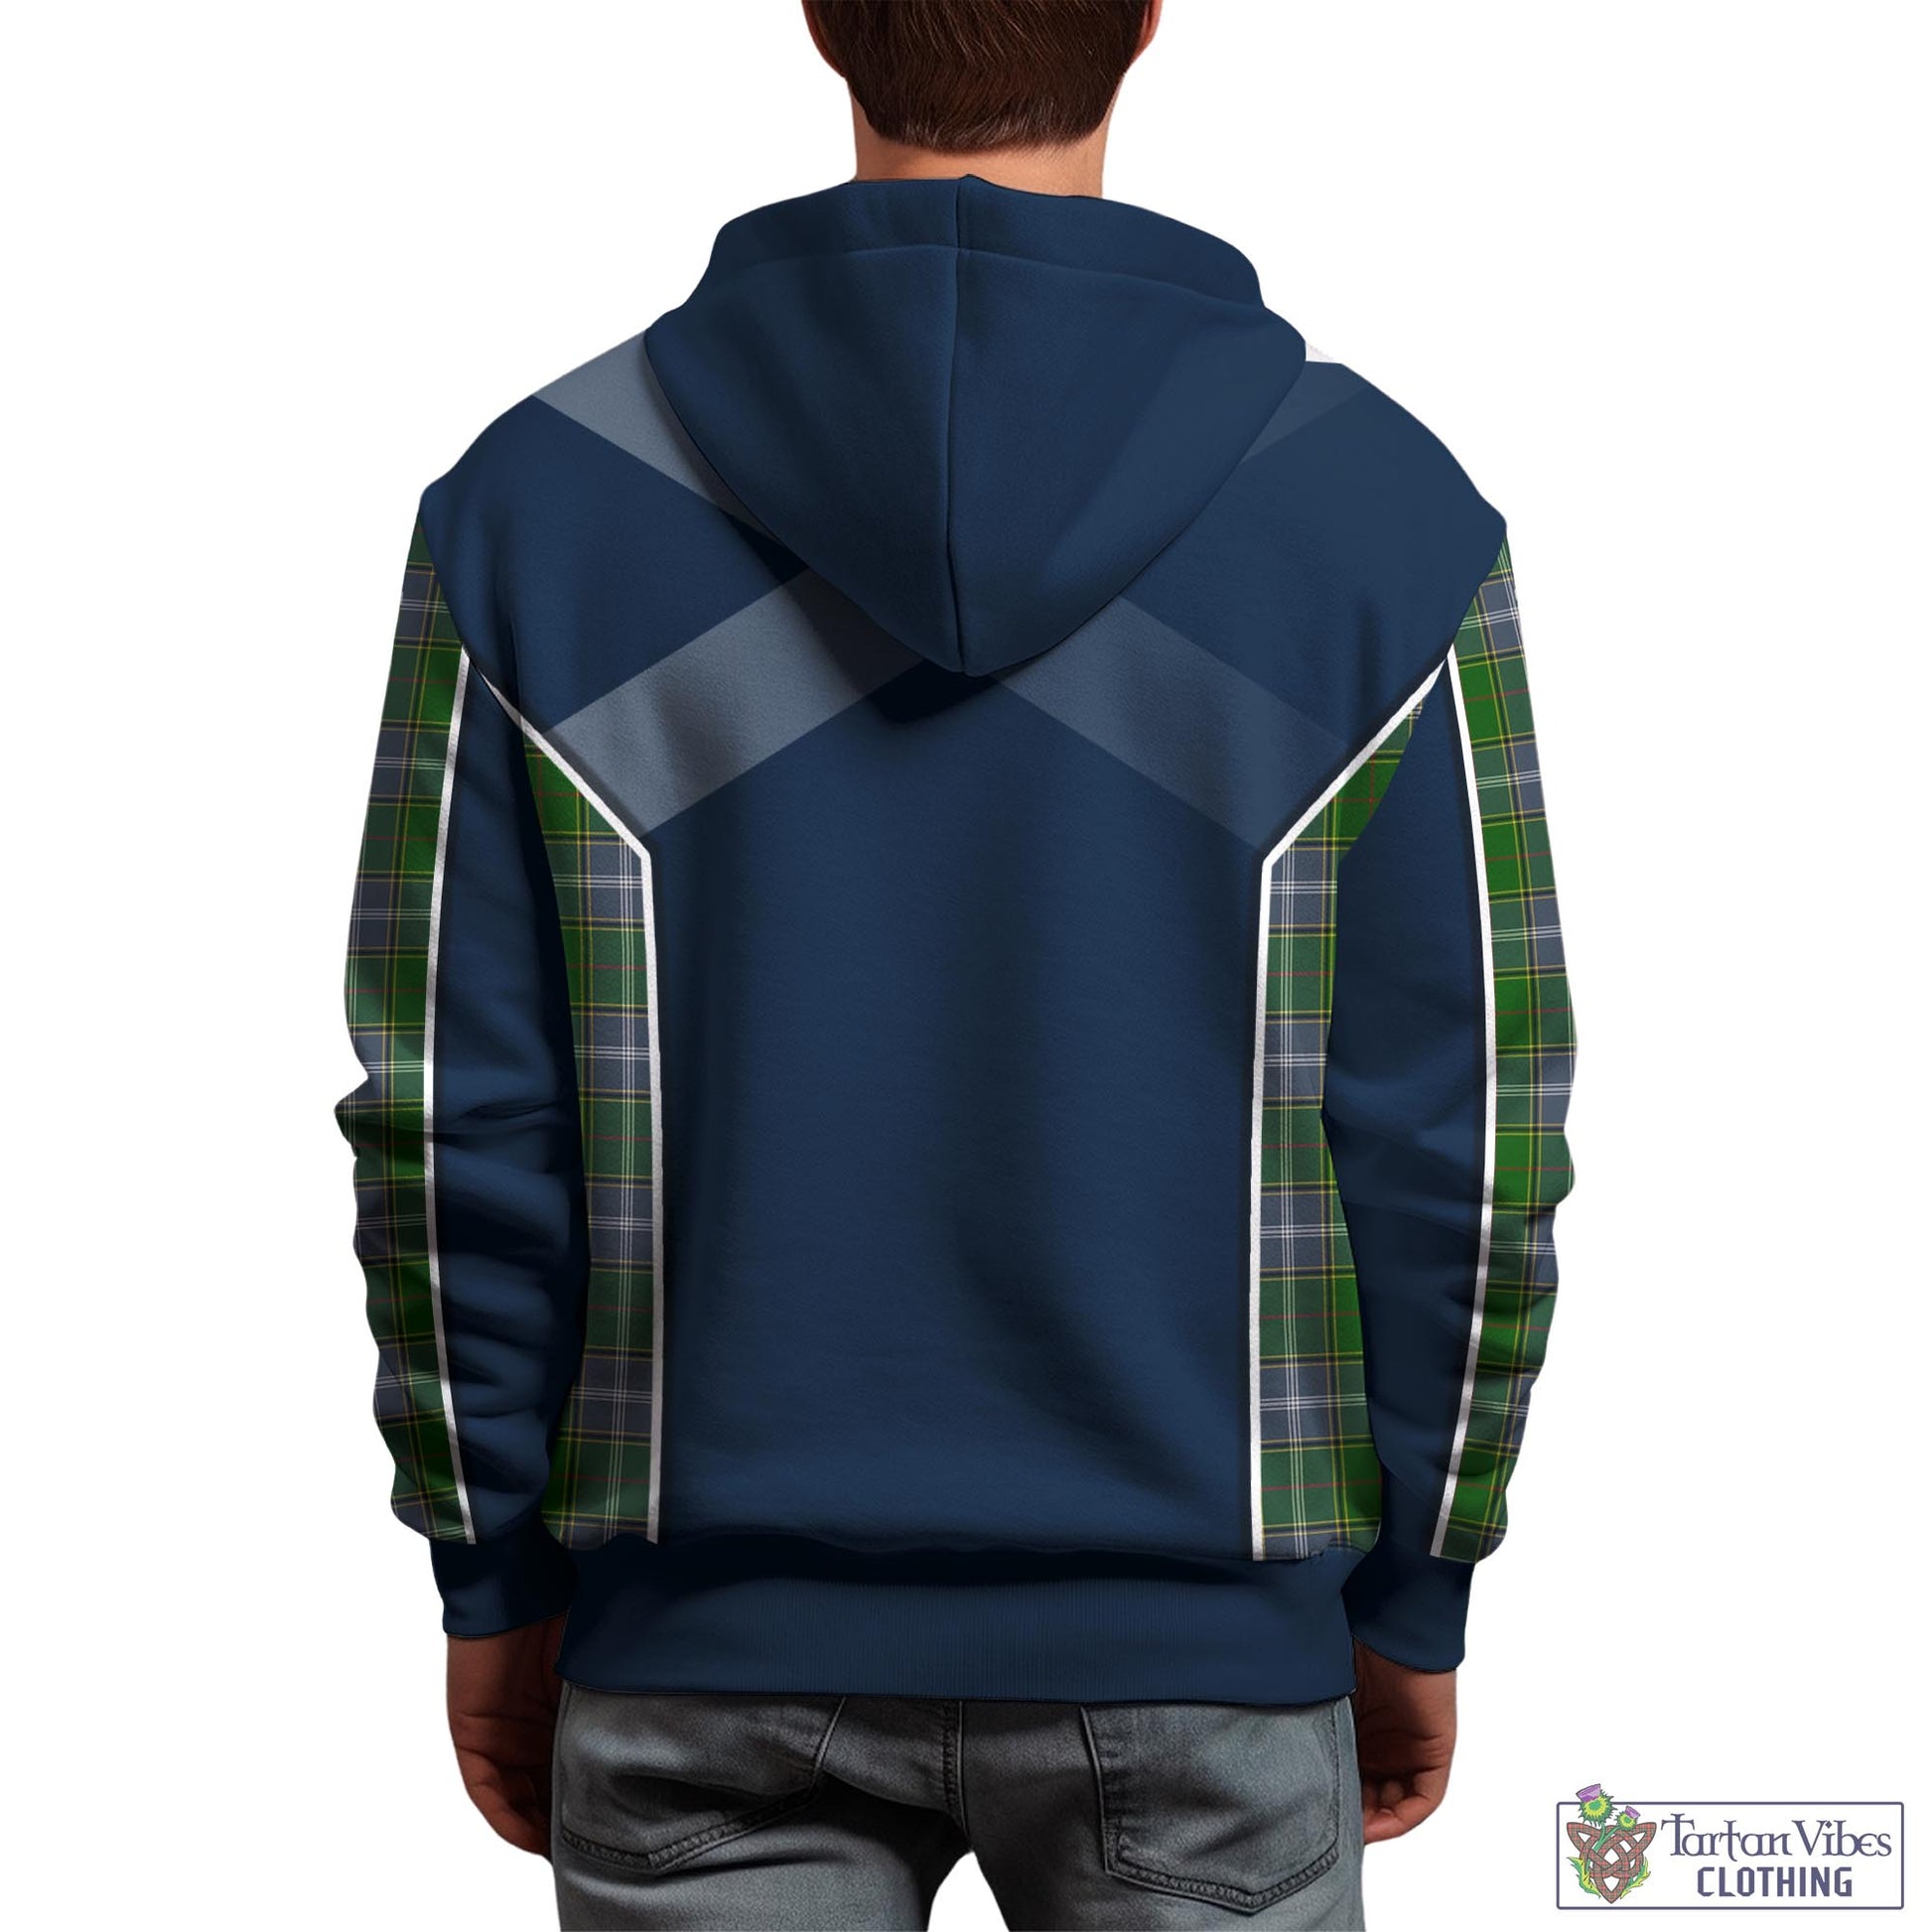 Tartan Vibes Clothing Pringle Tartan Hoodie with Family Crest and Scottish Thistle Vibes Sport Style